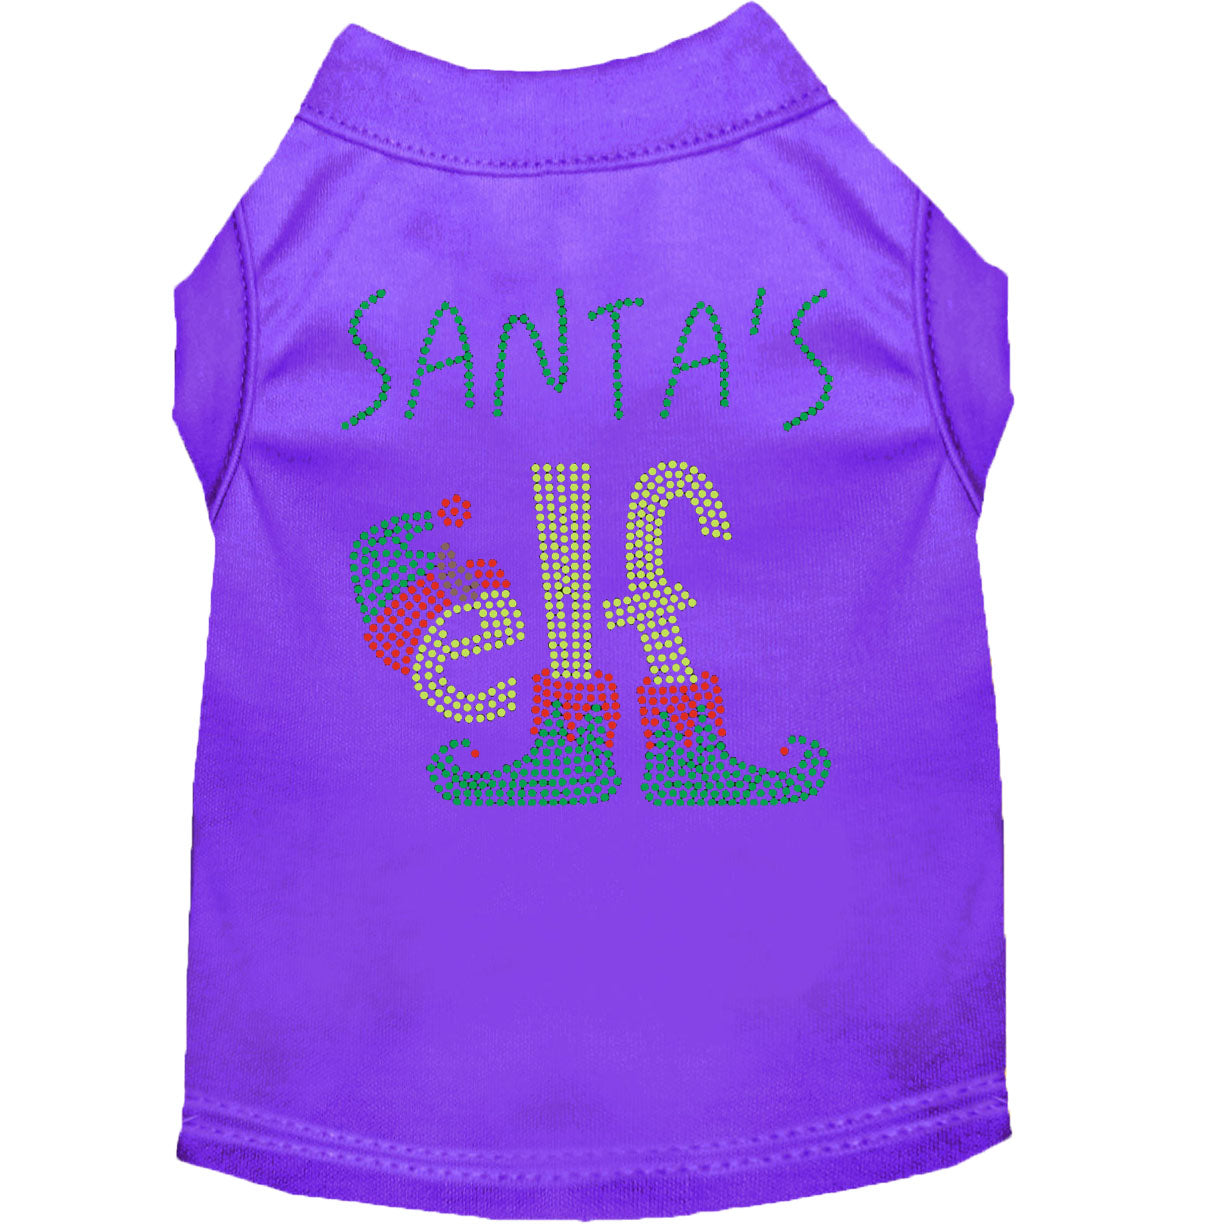 Santa's Elf Rhinestone Shirts for Cats and Dogs